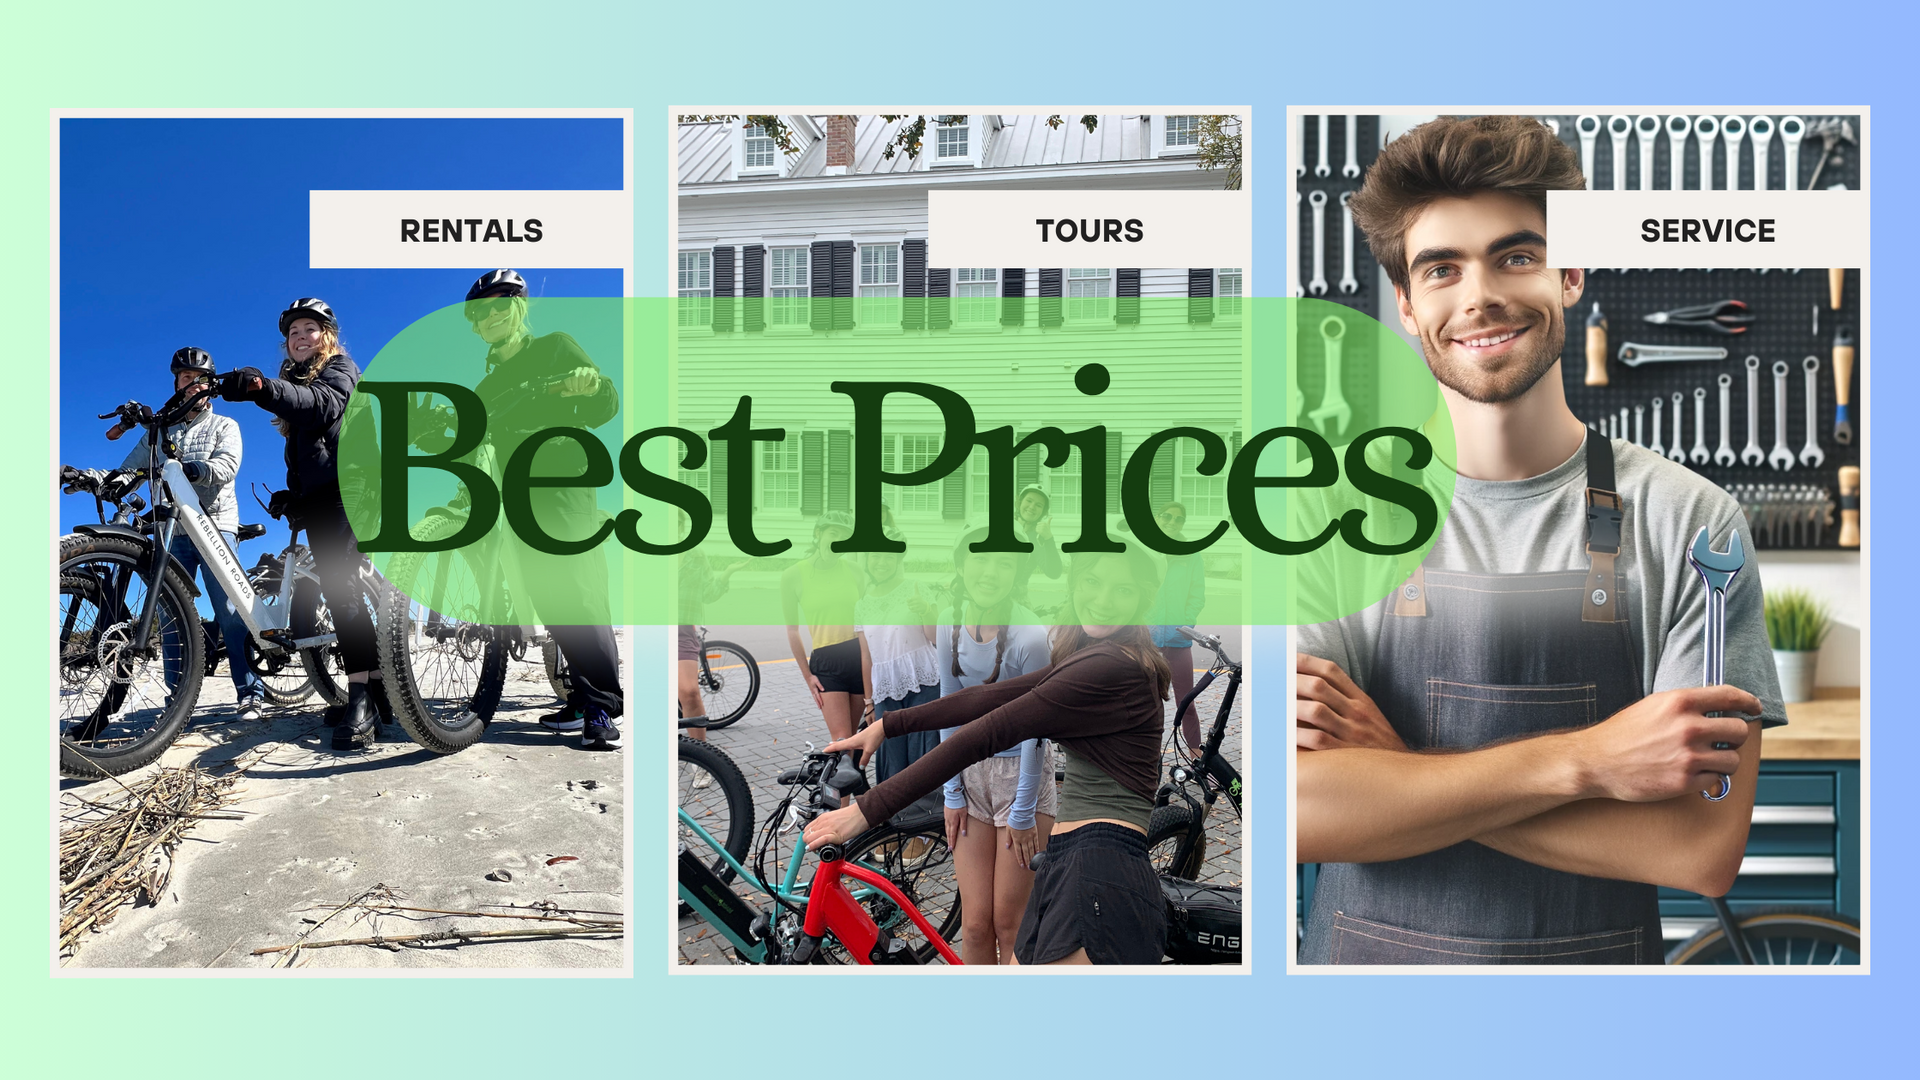 a man is standing in front of a sign that says `` best prices '' .